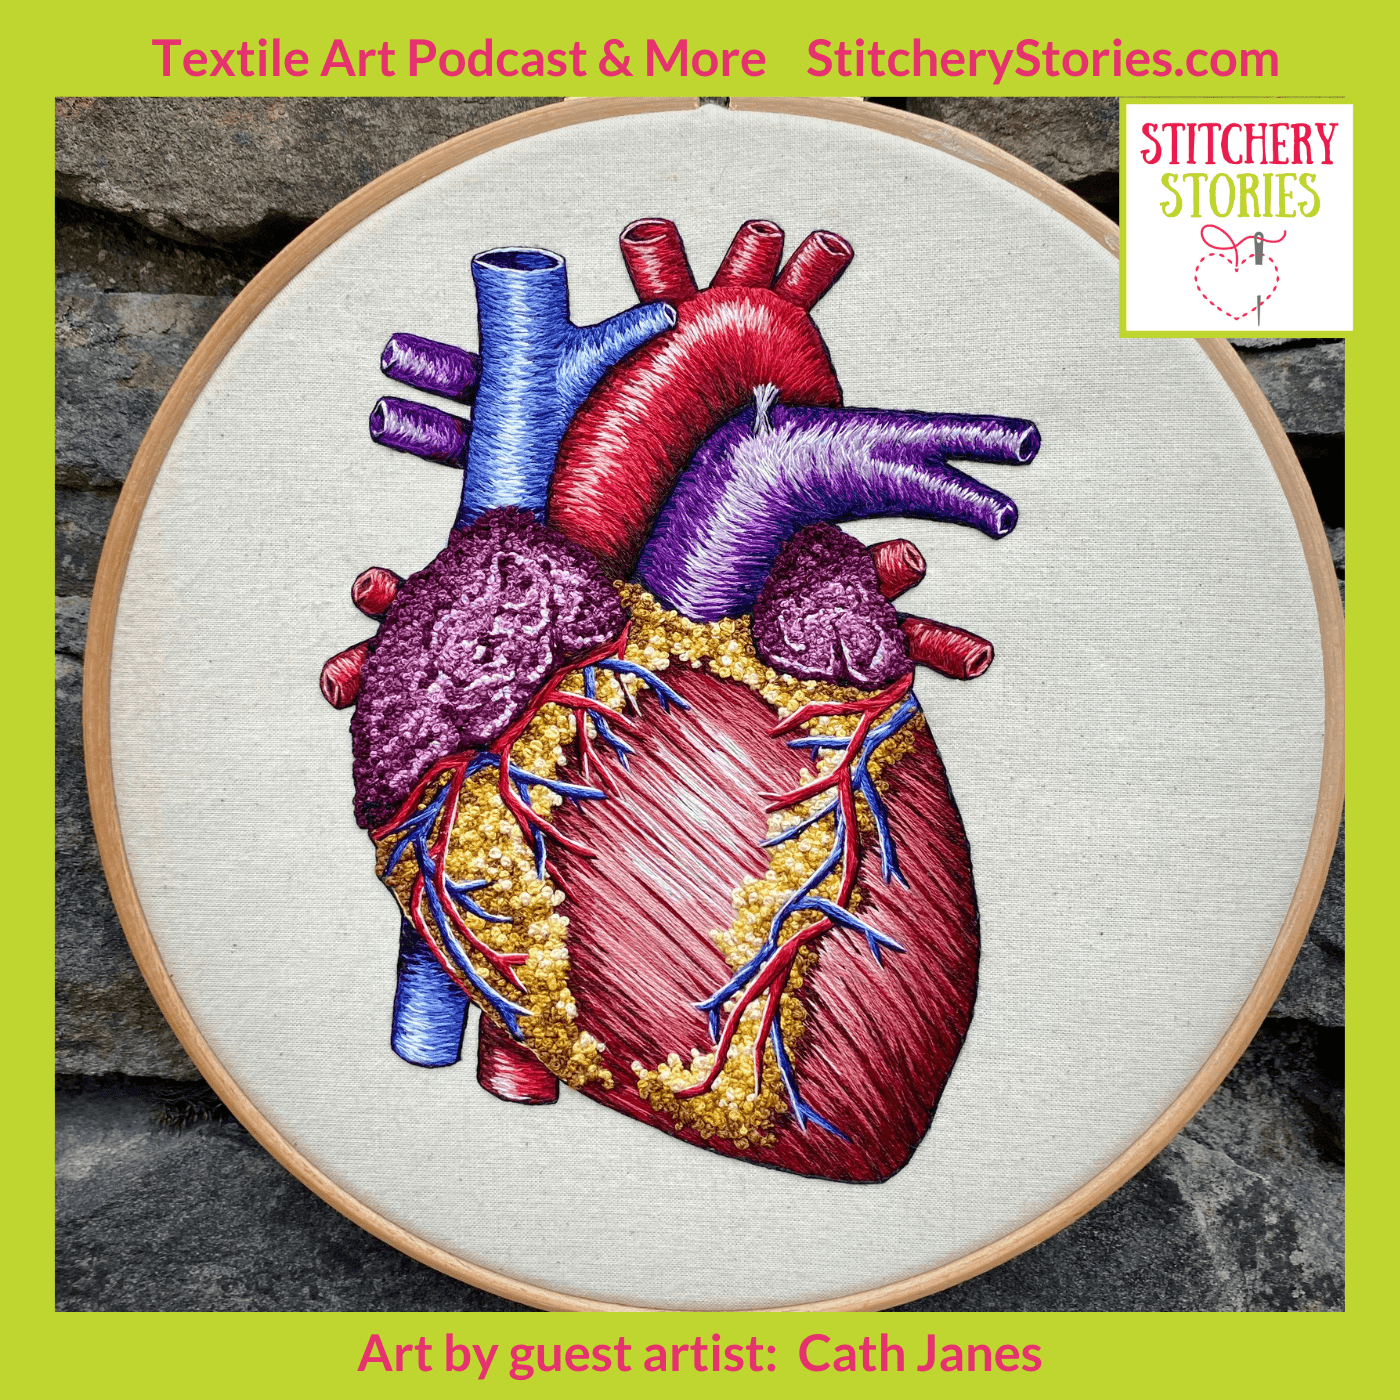 heart 2022 by cath janes Stitchery Stories podcast